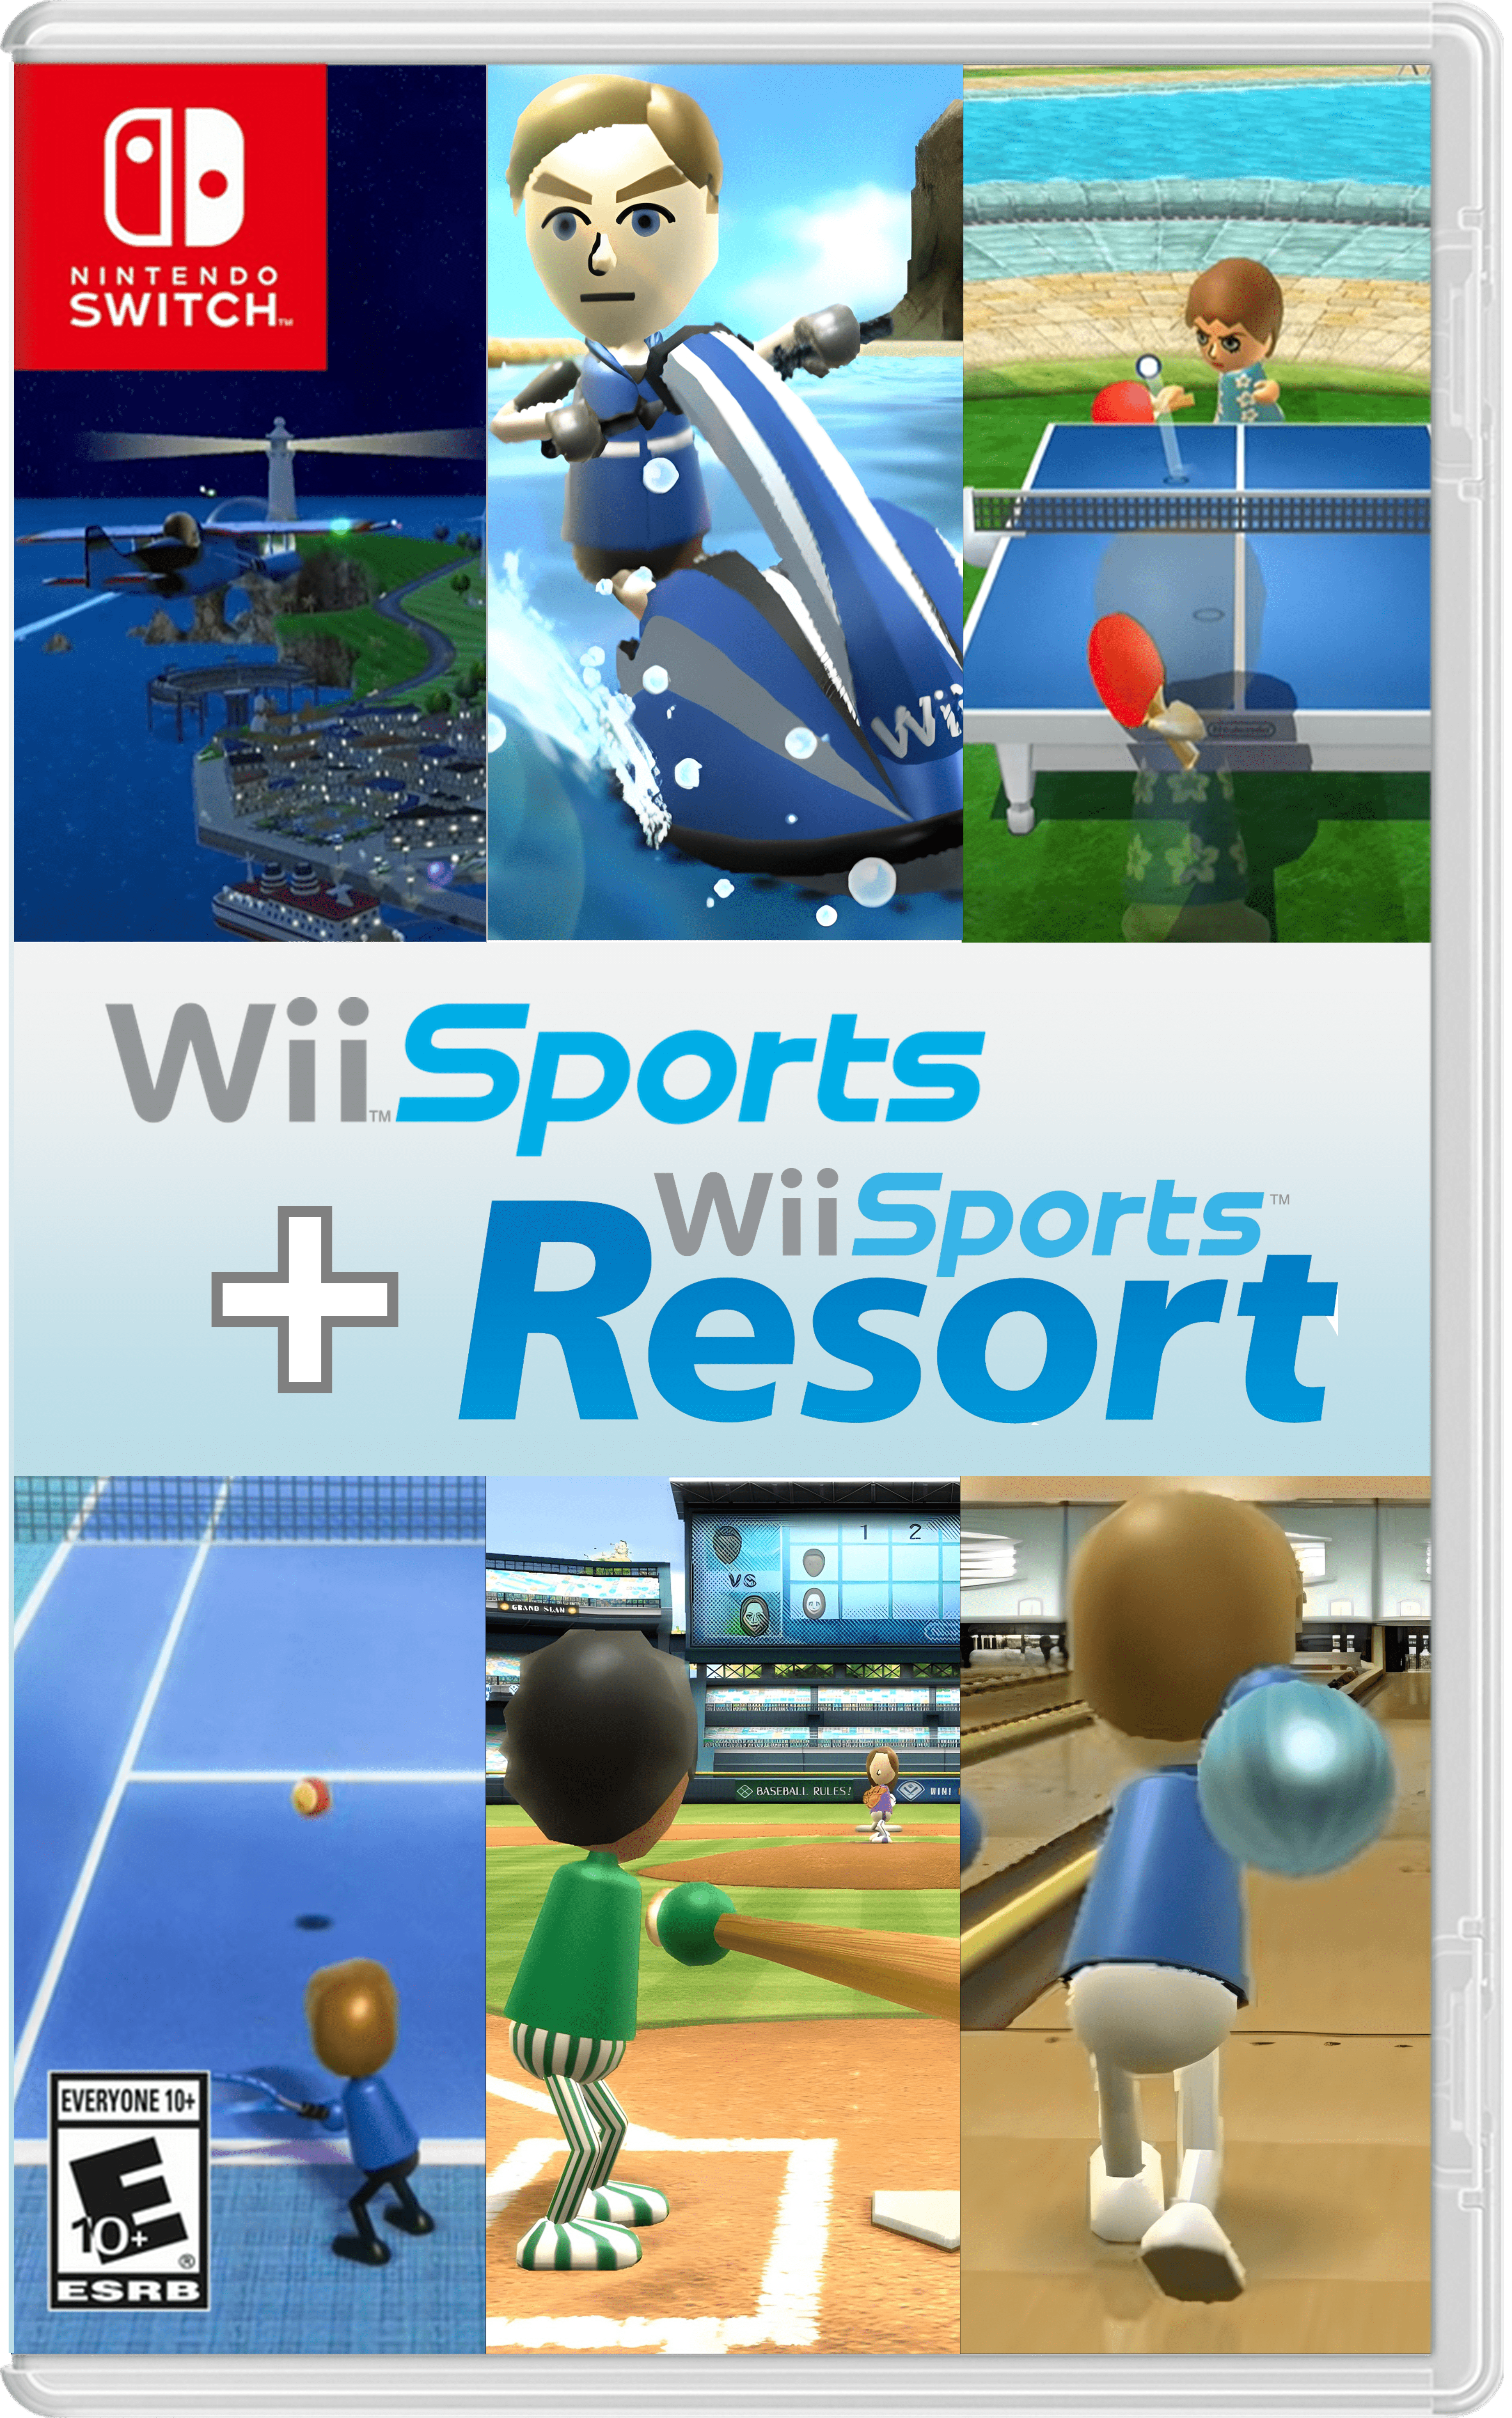 https://static.wikia.nocookie.net/ideas/images/7/7b/WiiSportsResortCover.png/revision/latest?cb=20220903001359